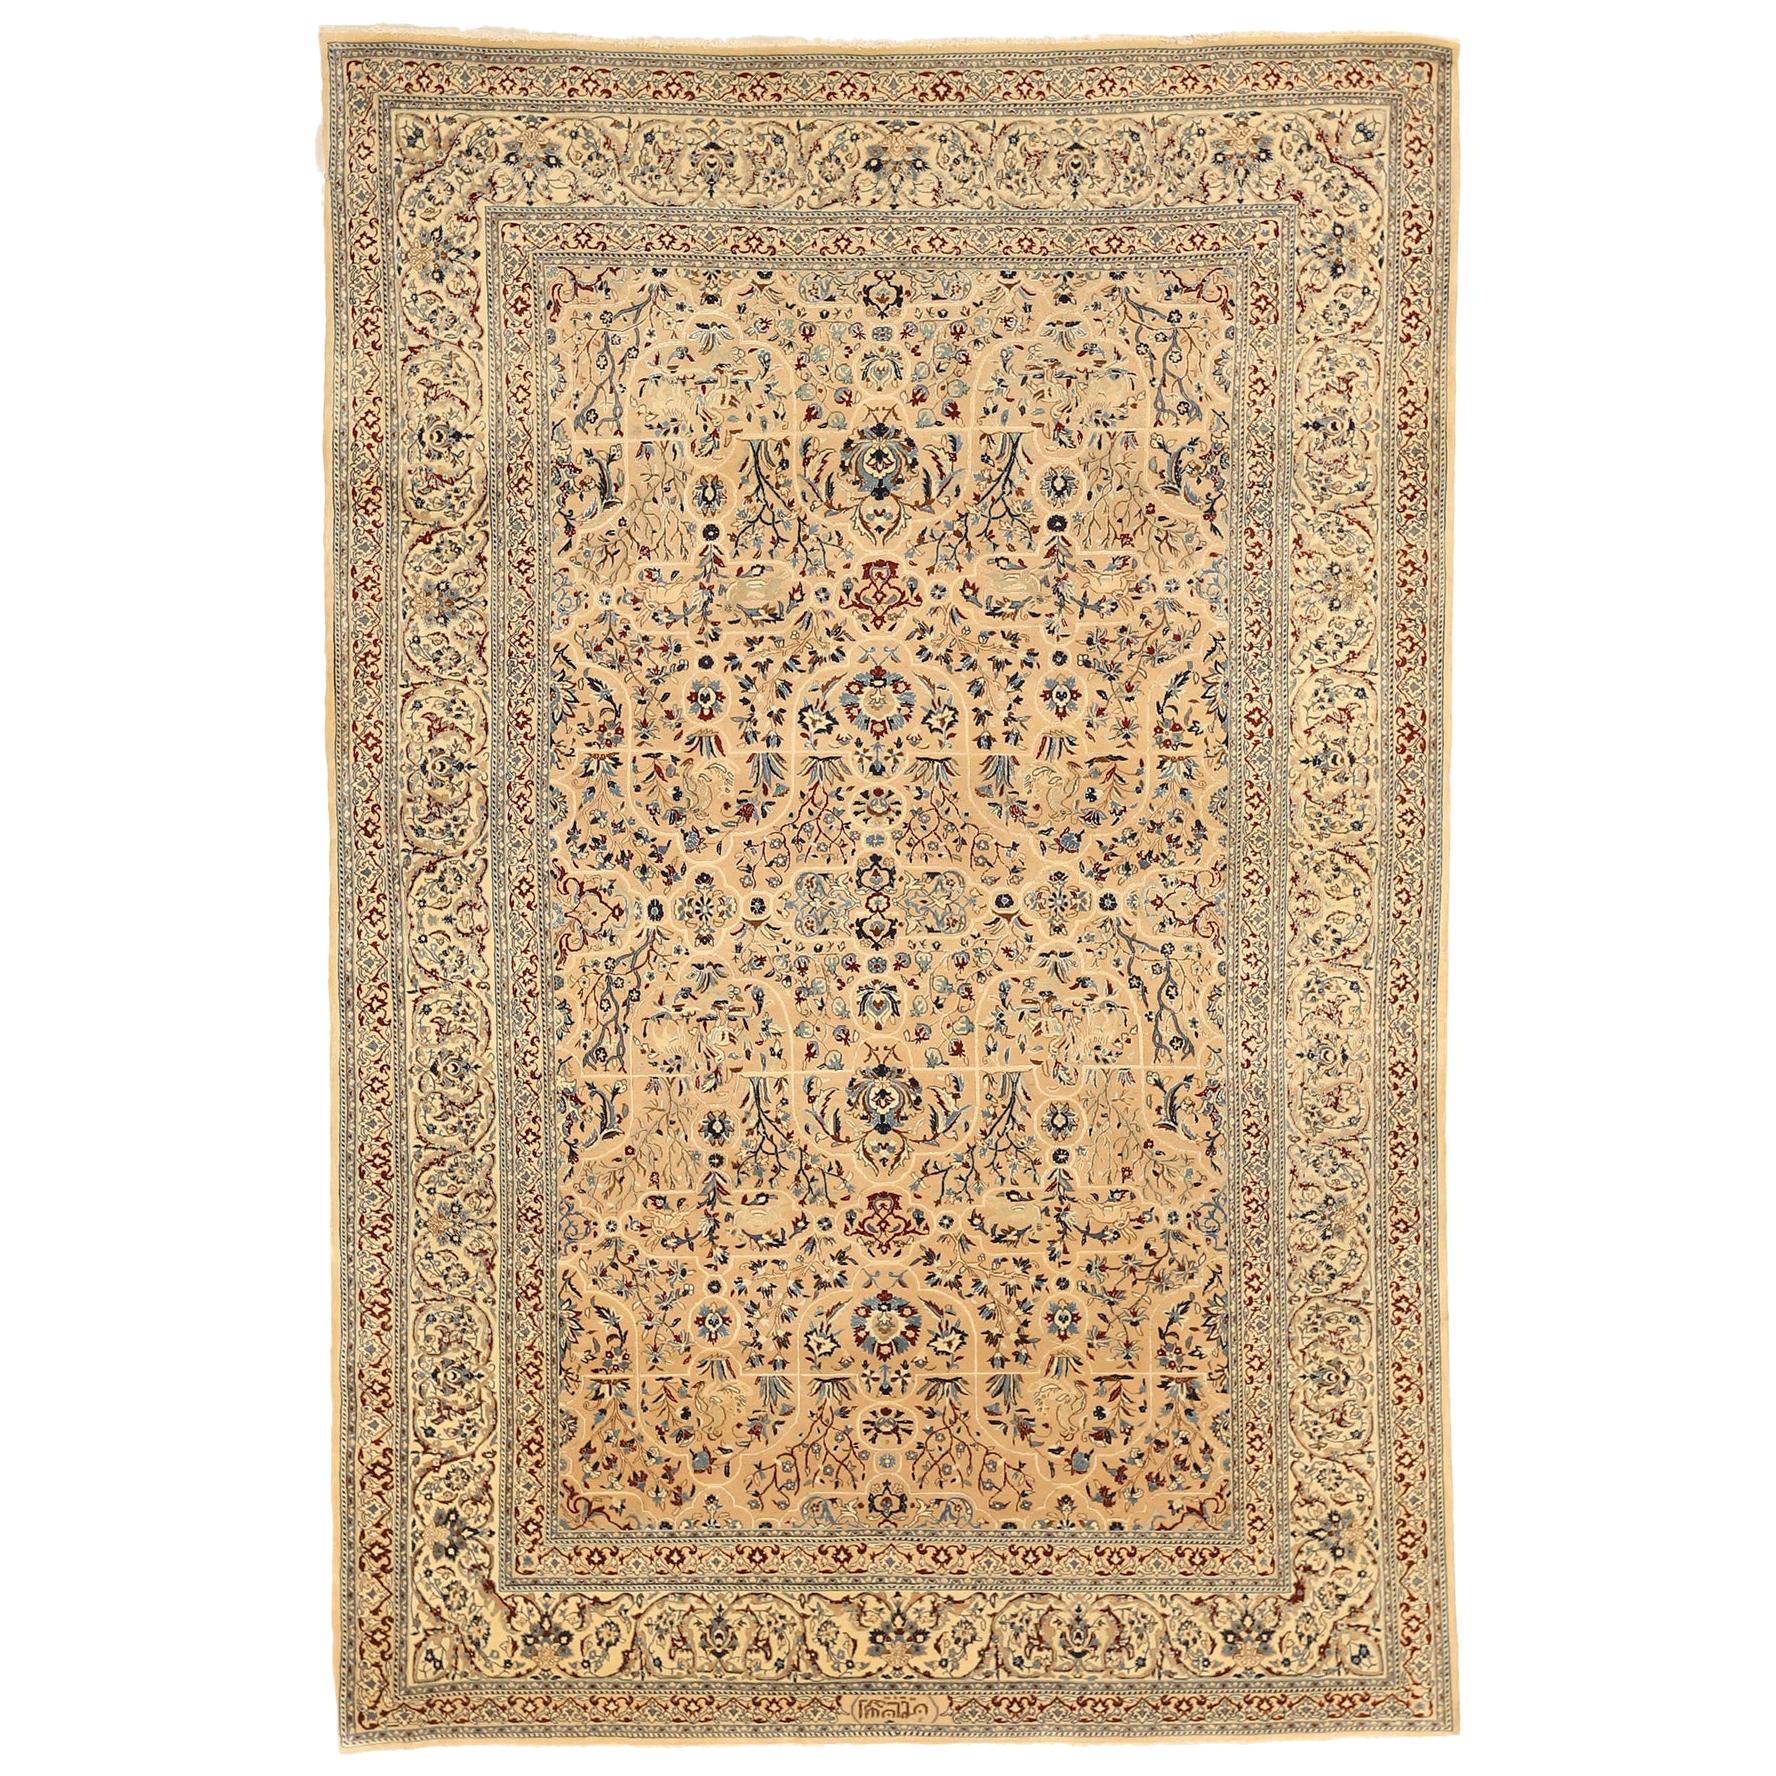 Contemporary Persian Nain Rug with Black, Brown and Gray Floral Details